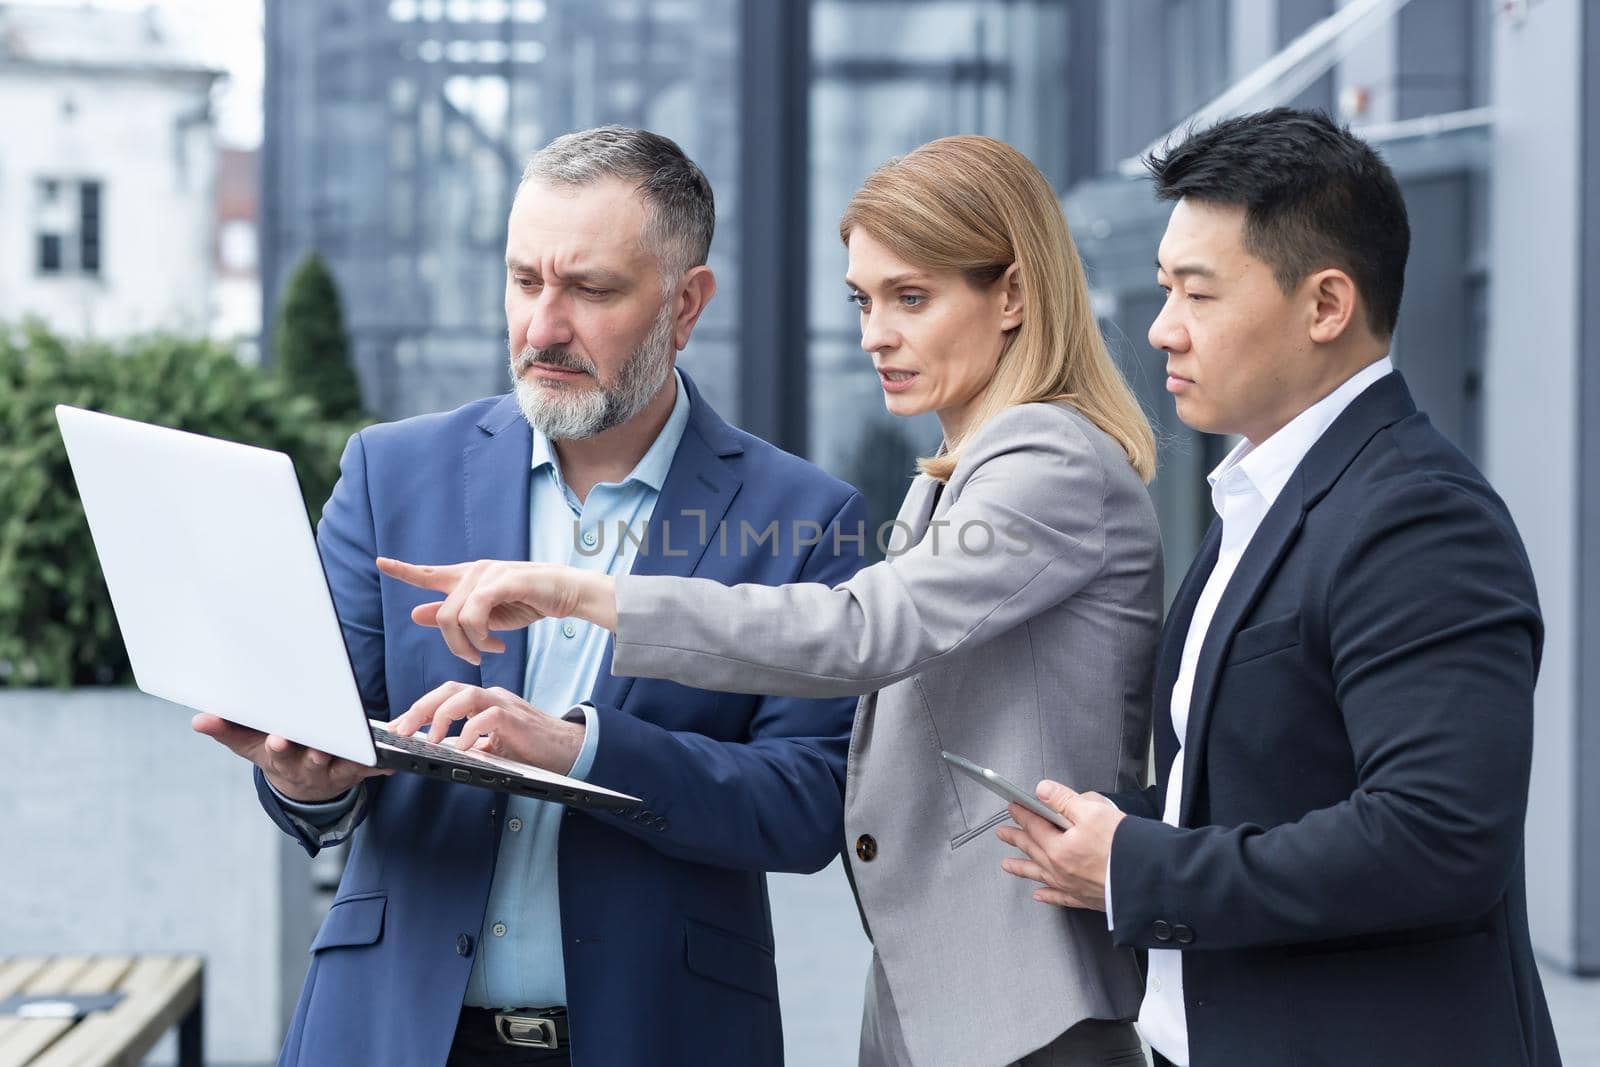 Successful business team, three colleagues businessman and businesswoman outside office building discussing current plans and management, looking at laptop screen, discussing and consulting